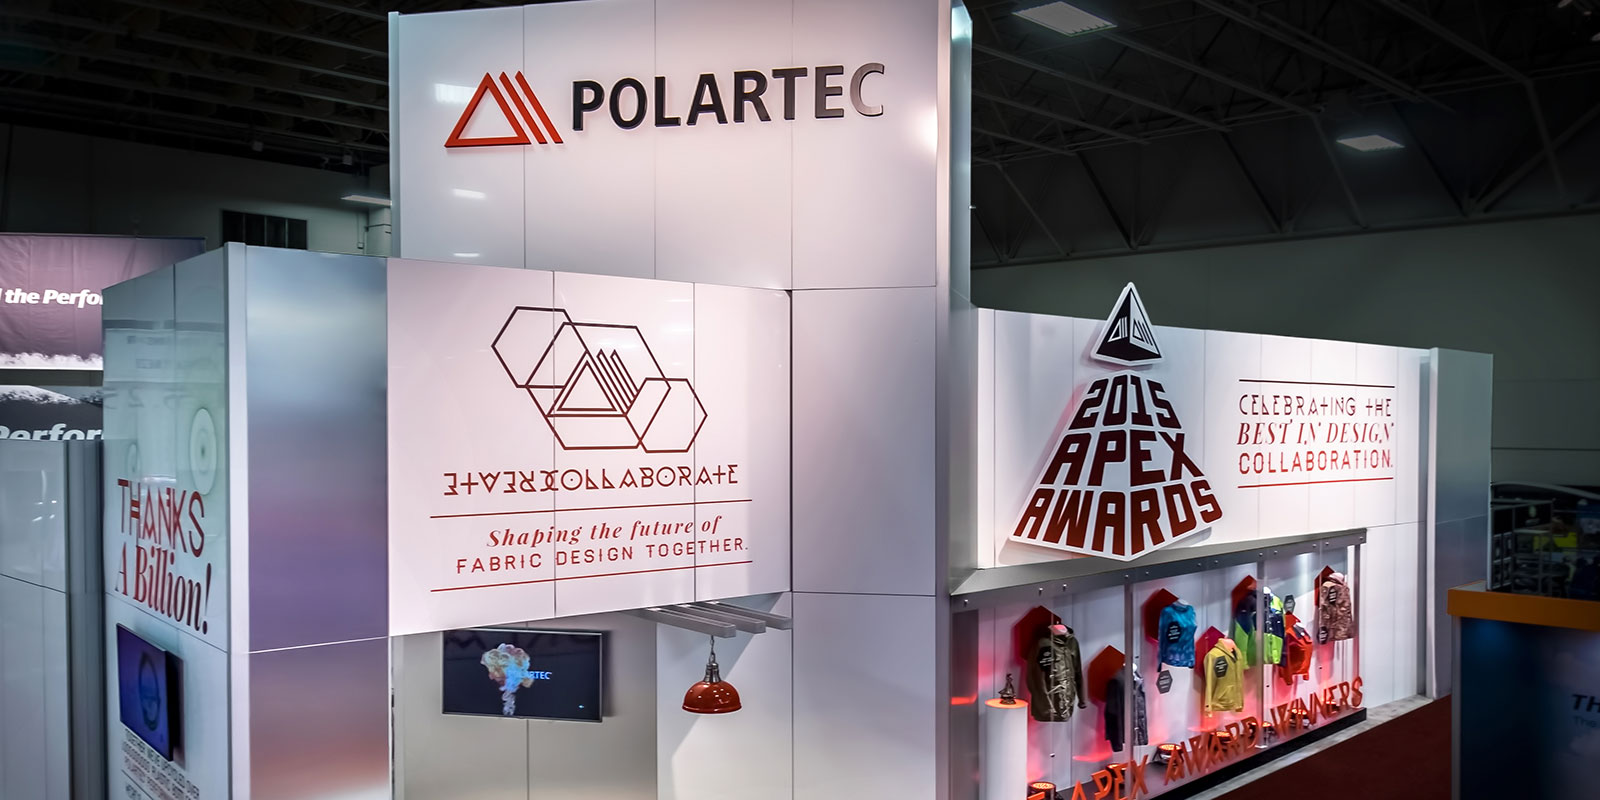 Hill & Partners Rental Branded Environment Trade Show Exhibit for Polartec